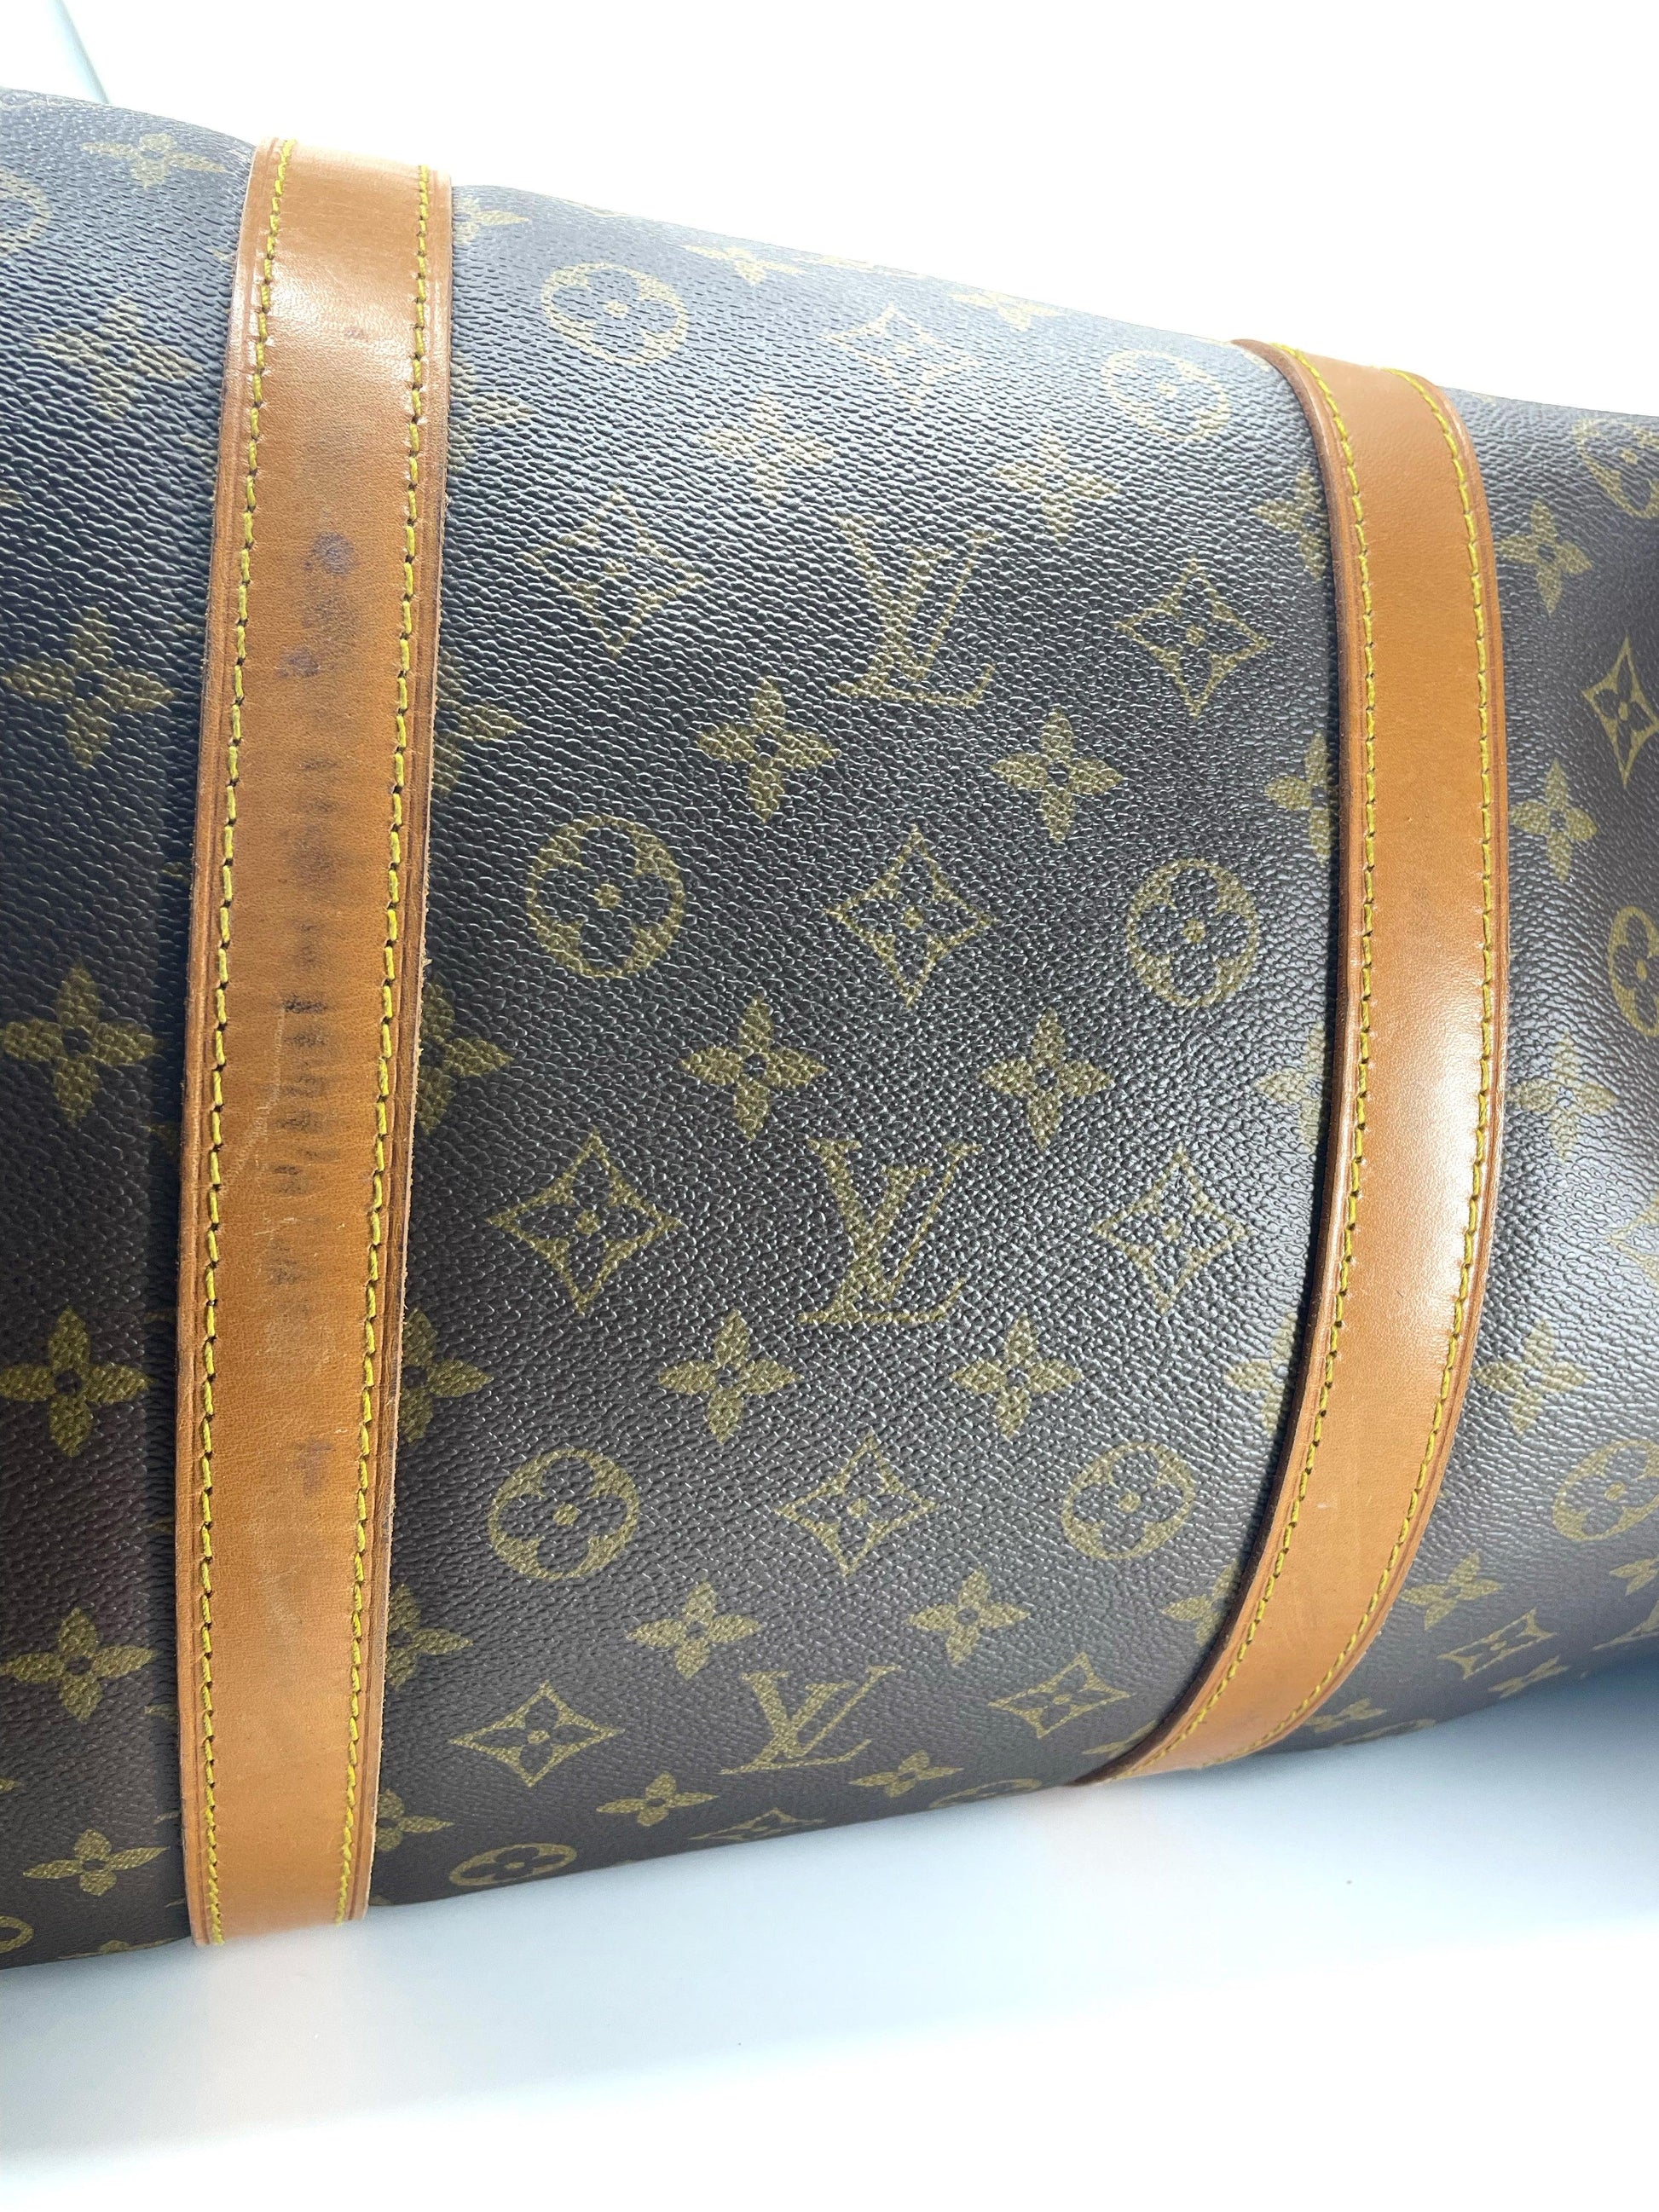 Louis Vuitton Monogram Suitcase Large 1980's - Pick Up Only, No Shipping